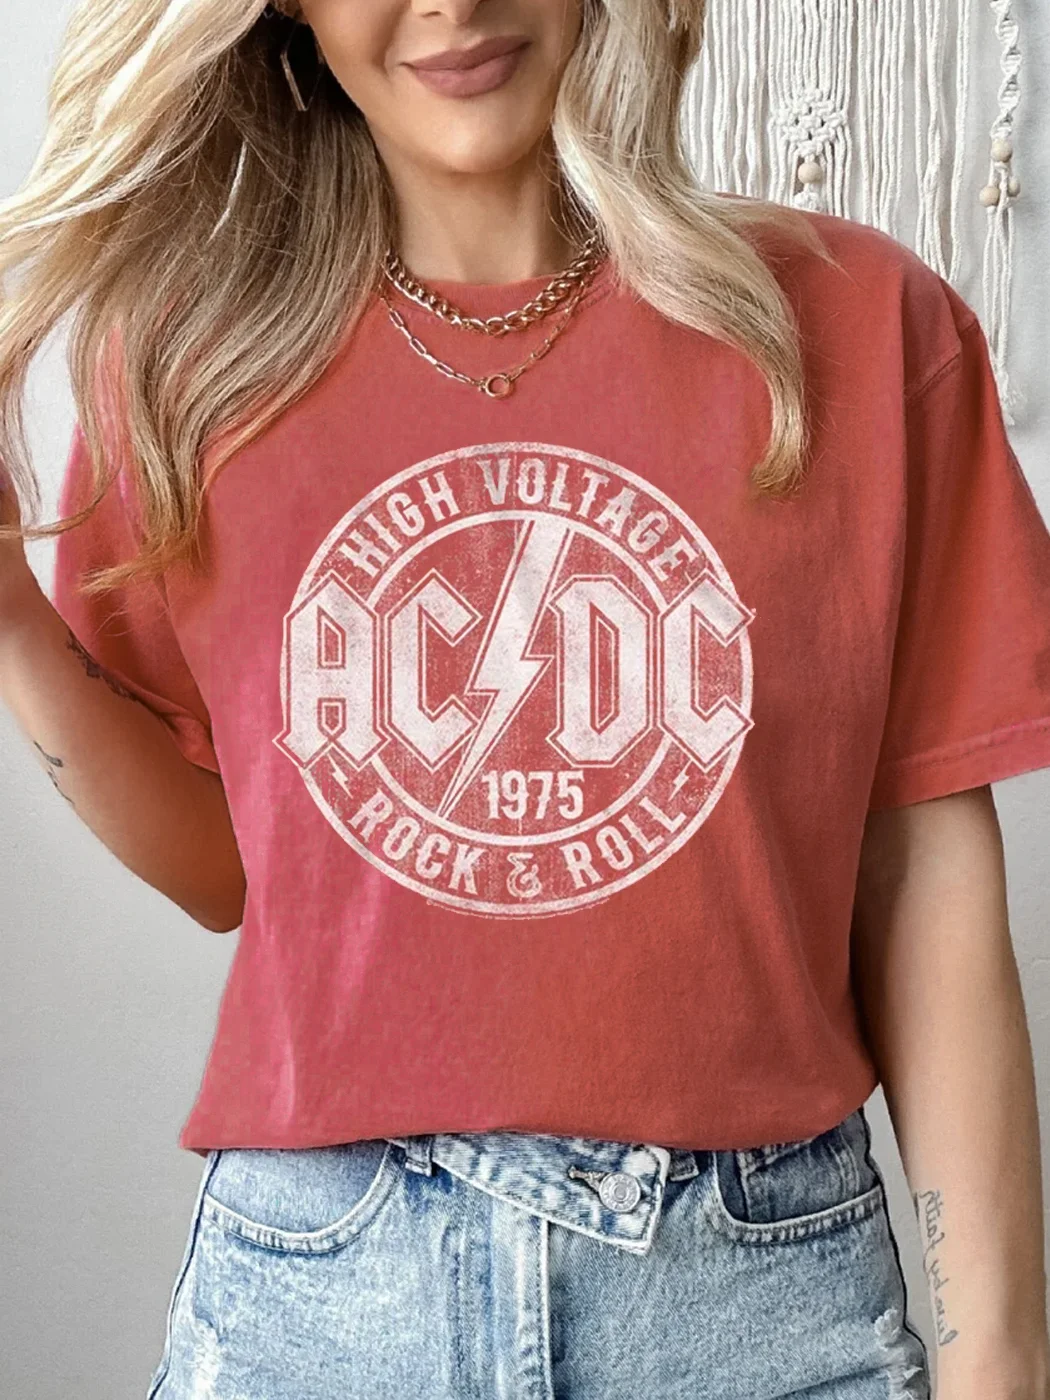 ACDC High Voltage Rock & Roll Music Rock And Roll Music Shirt / DarkAcademias /Darkacademias